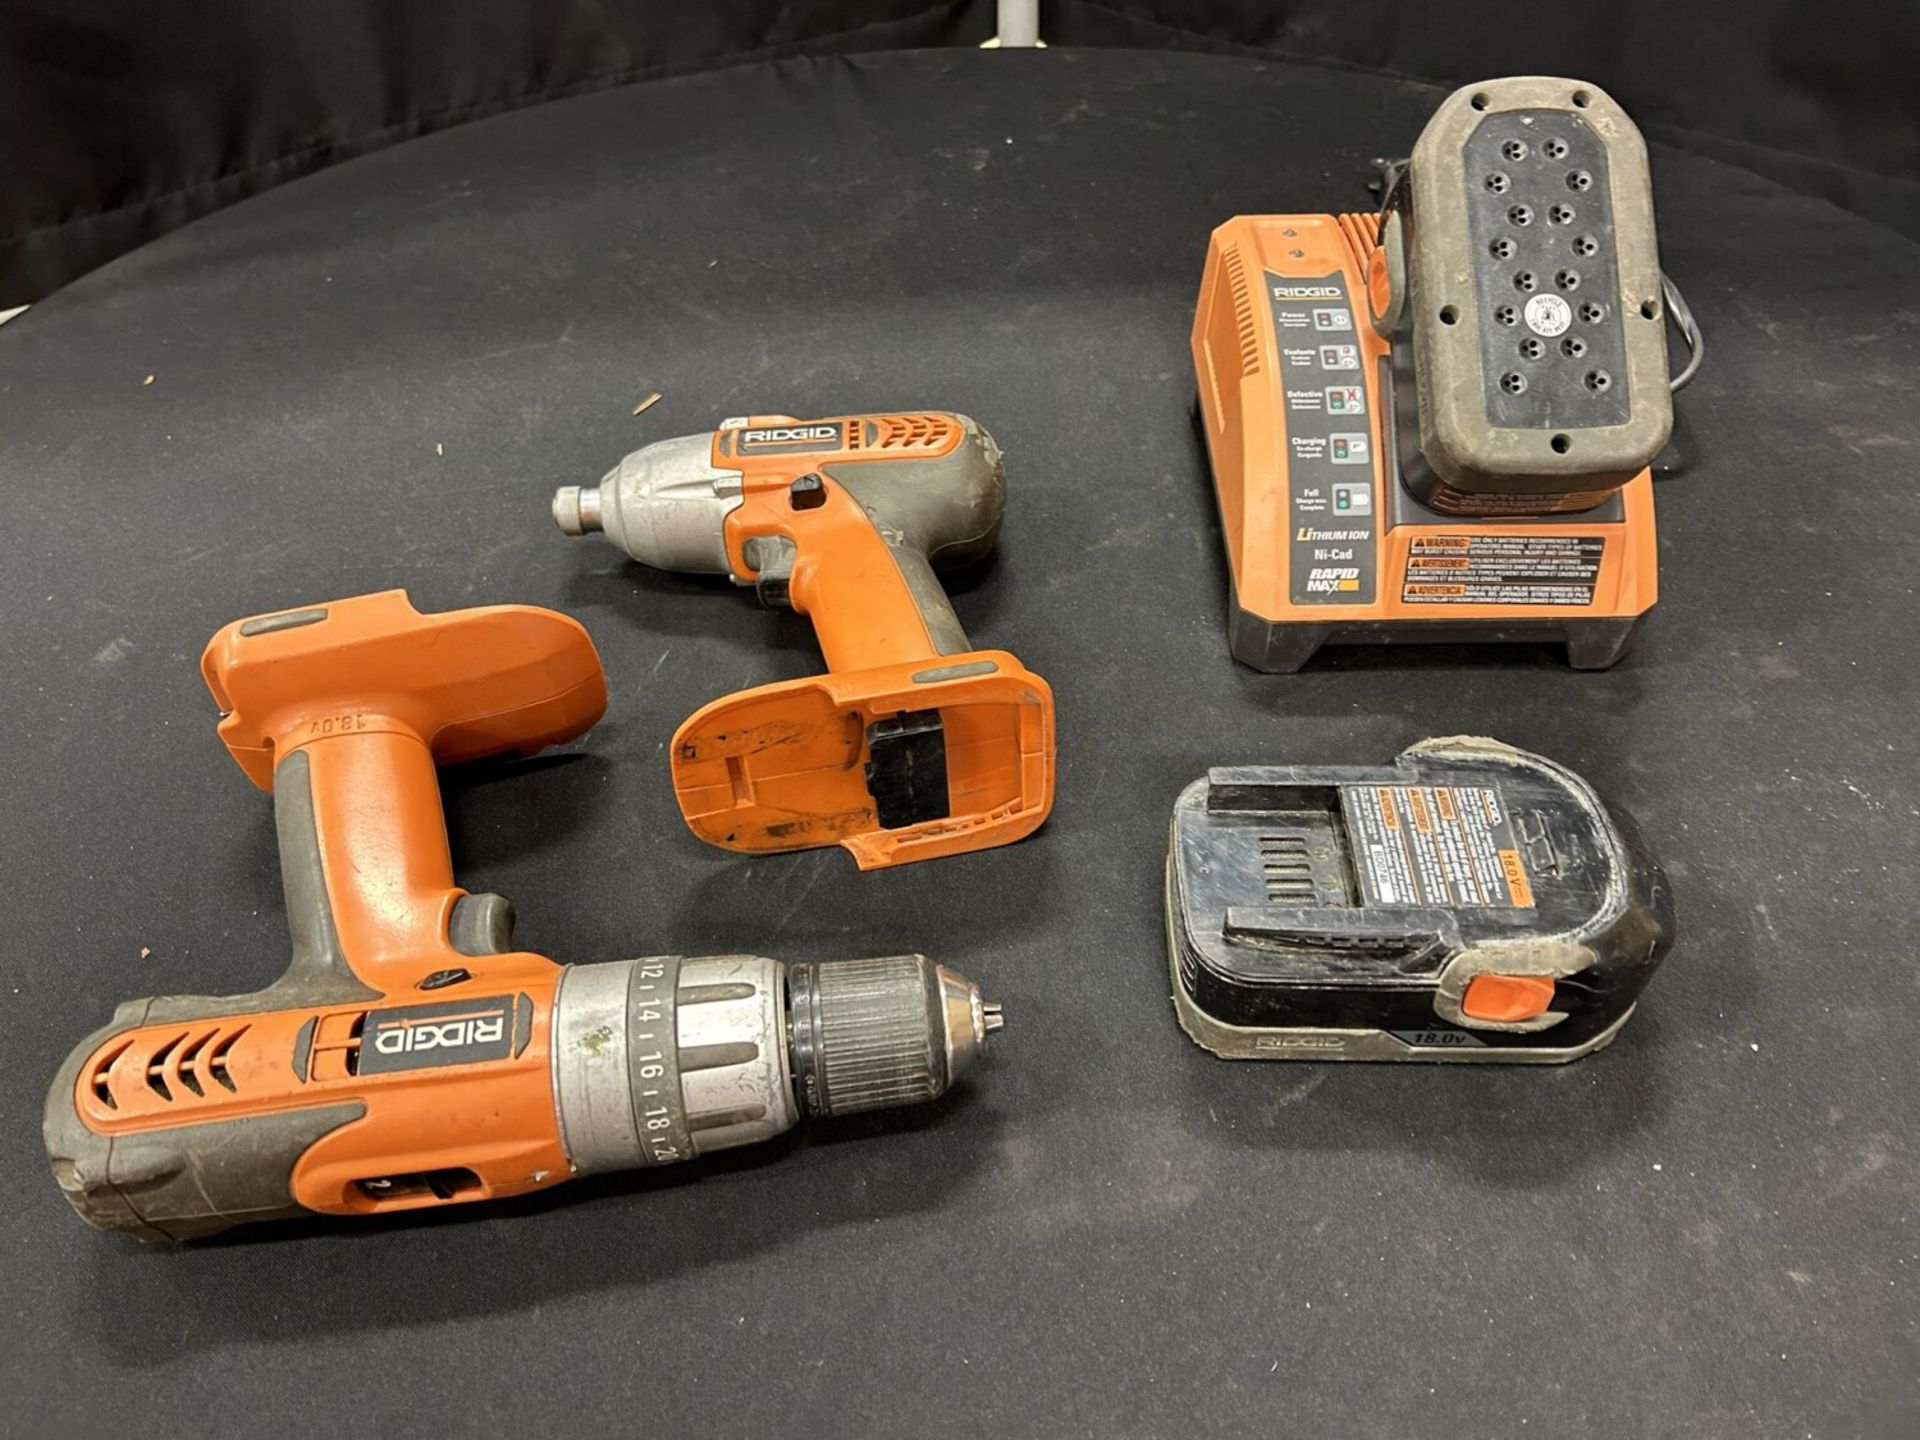 RIDGID CORDLESS DRILL KIT W/ BATTERY AND CHARGER